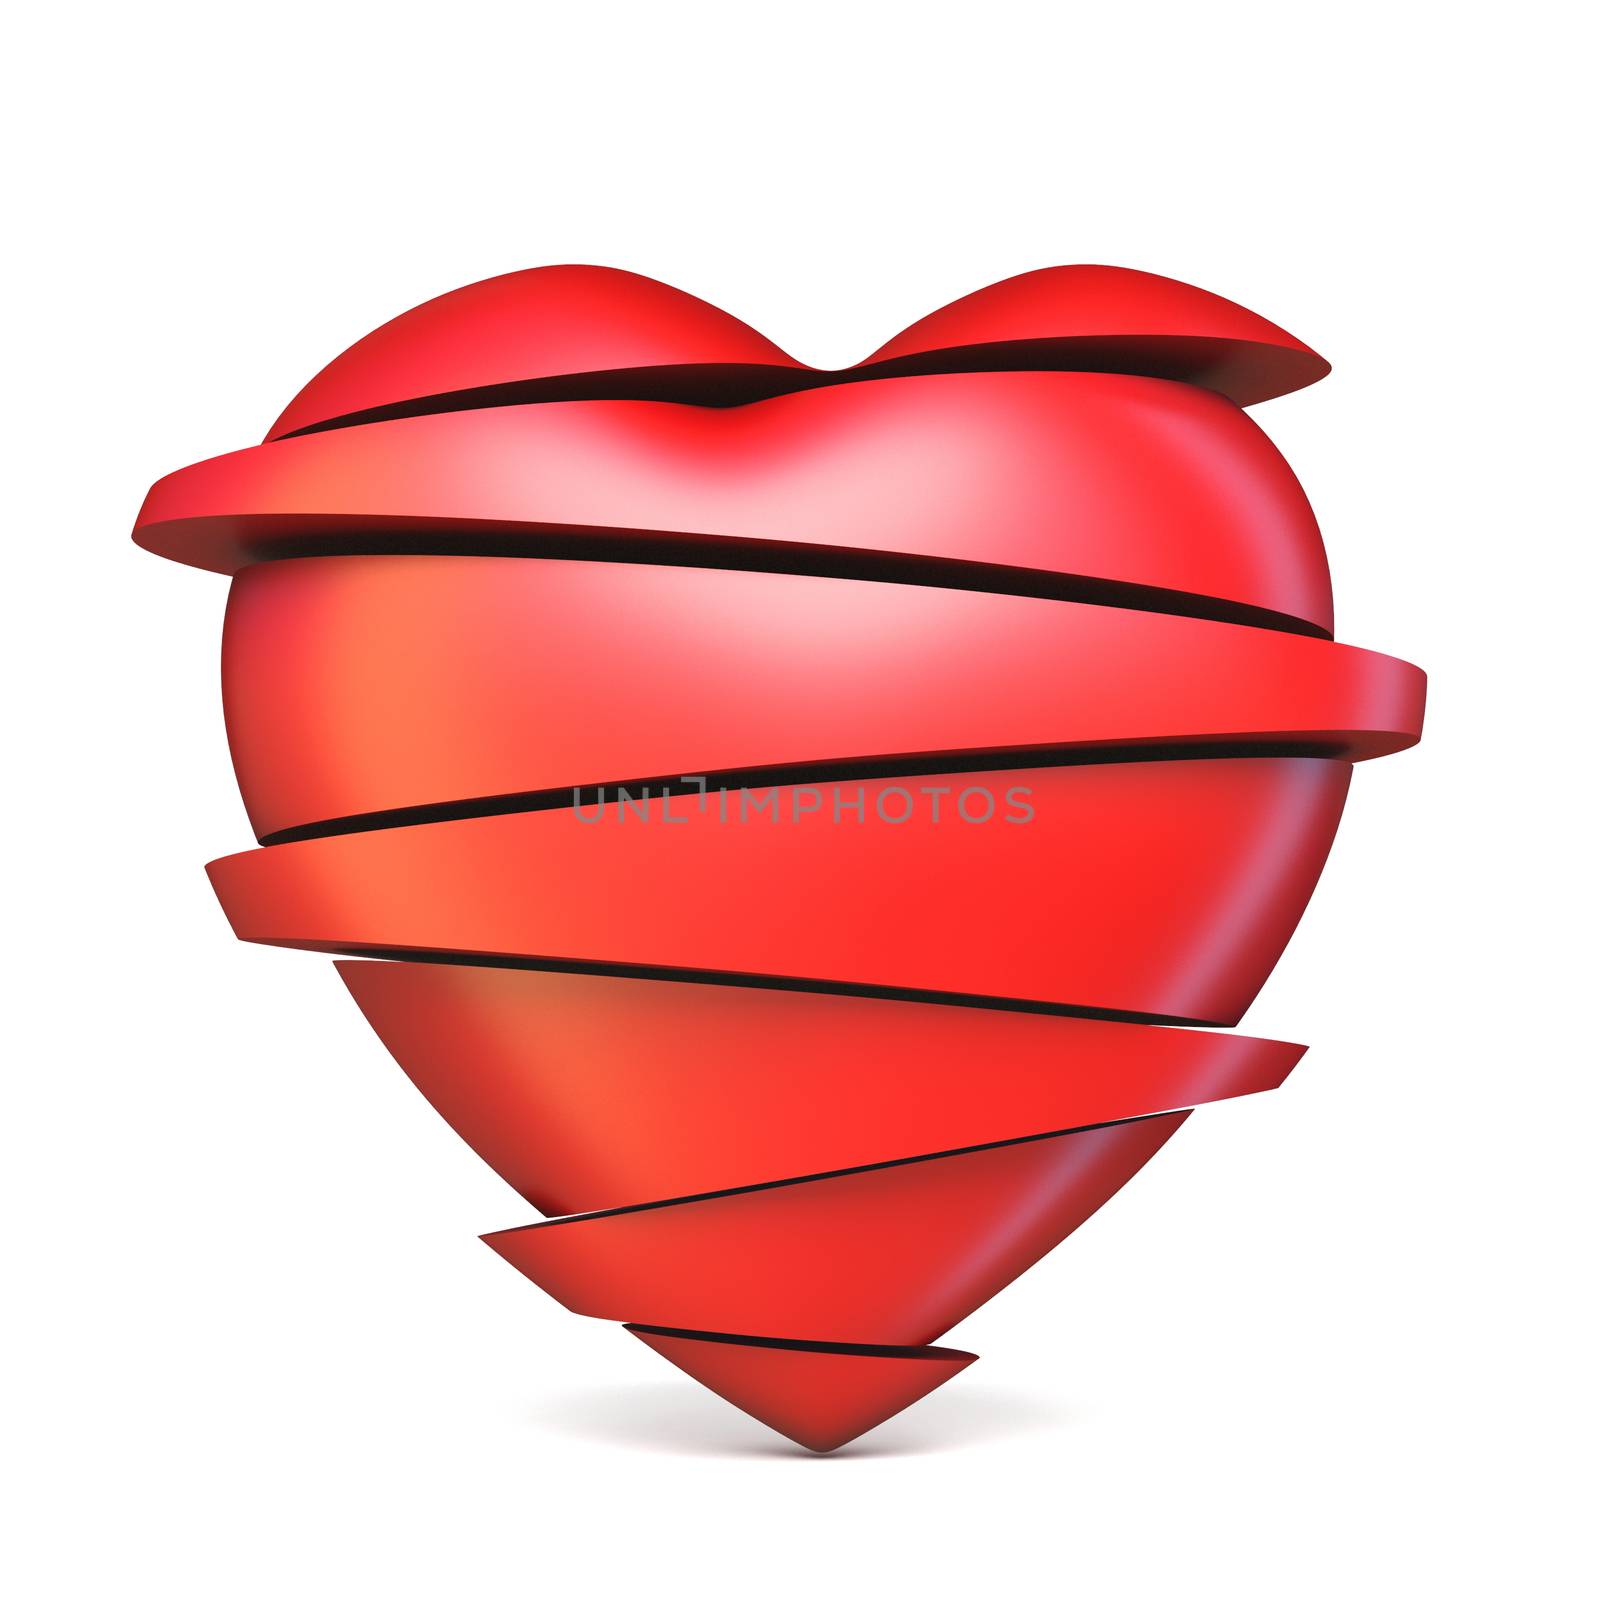 Sliced red heart 3D by djmilic